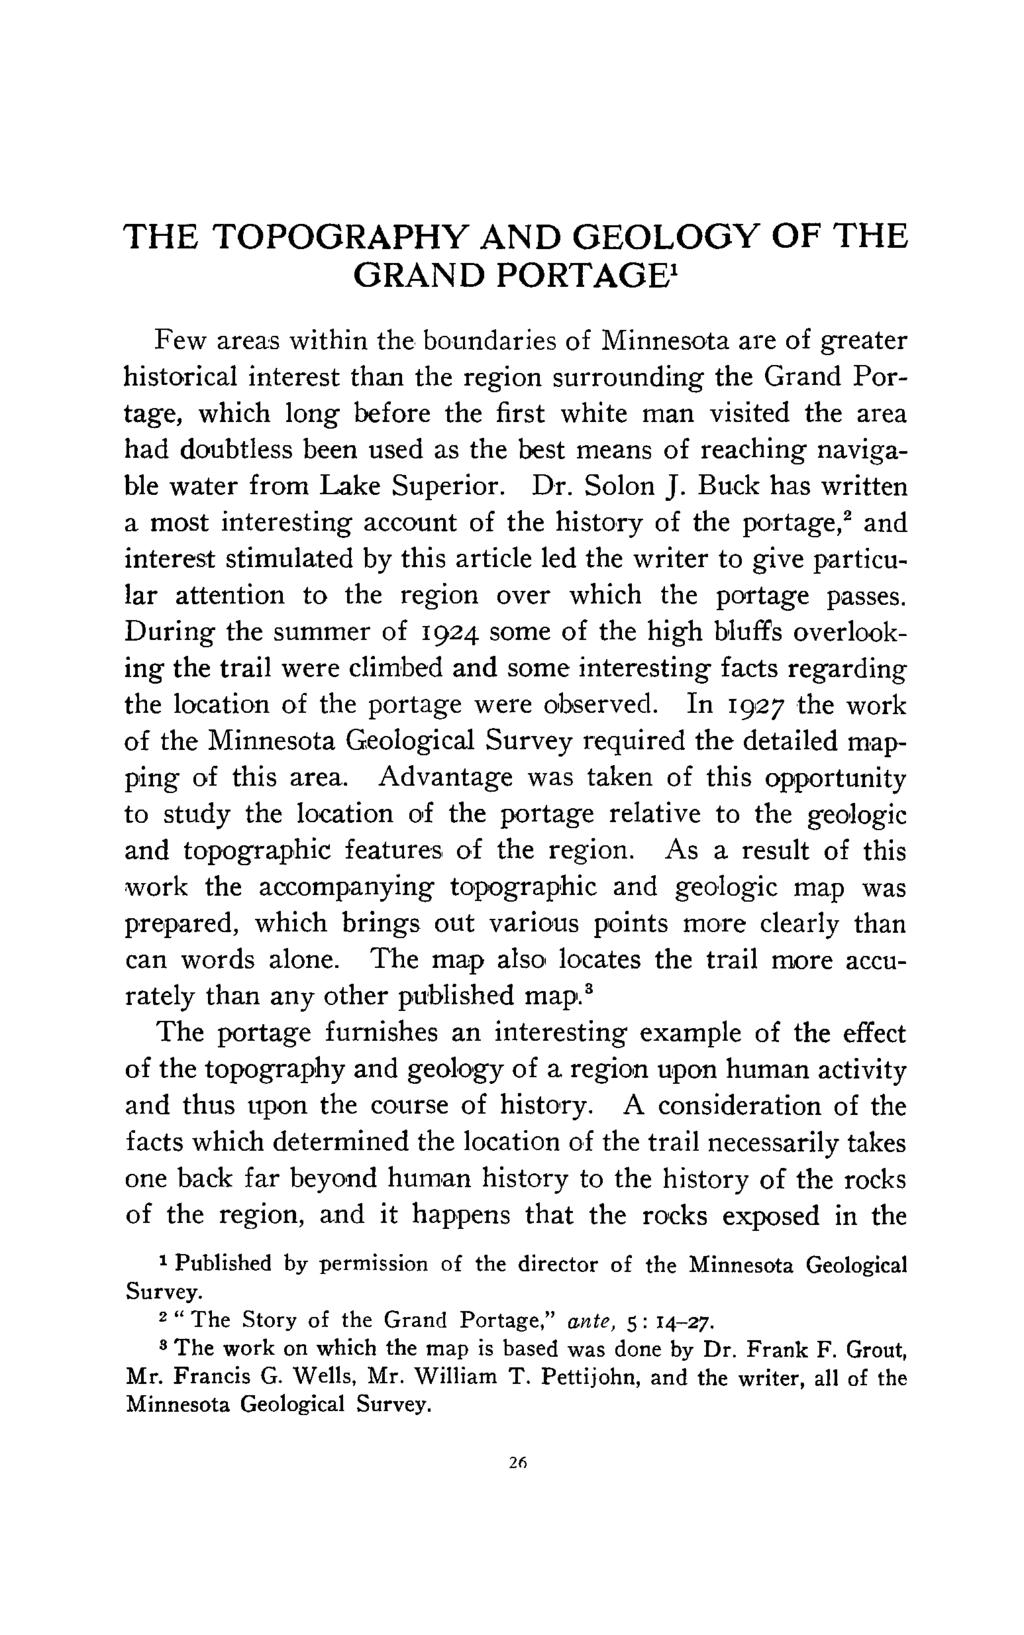 THE TOPOGRAPHY AND GEOLOGY OF THE GRAND PORTAGE^ Few areas within the boundaries of Minnesota are of greater historical interest than the region surrounding the Grand Portage, which long before the